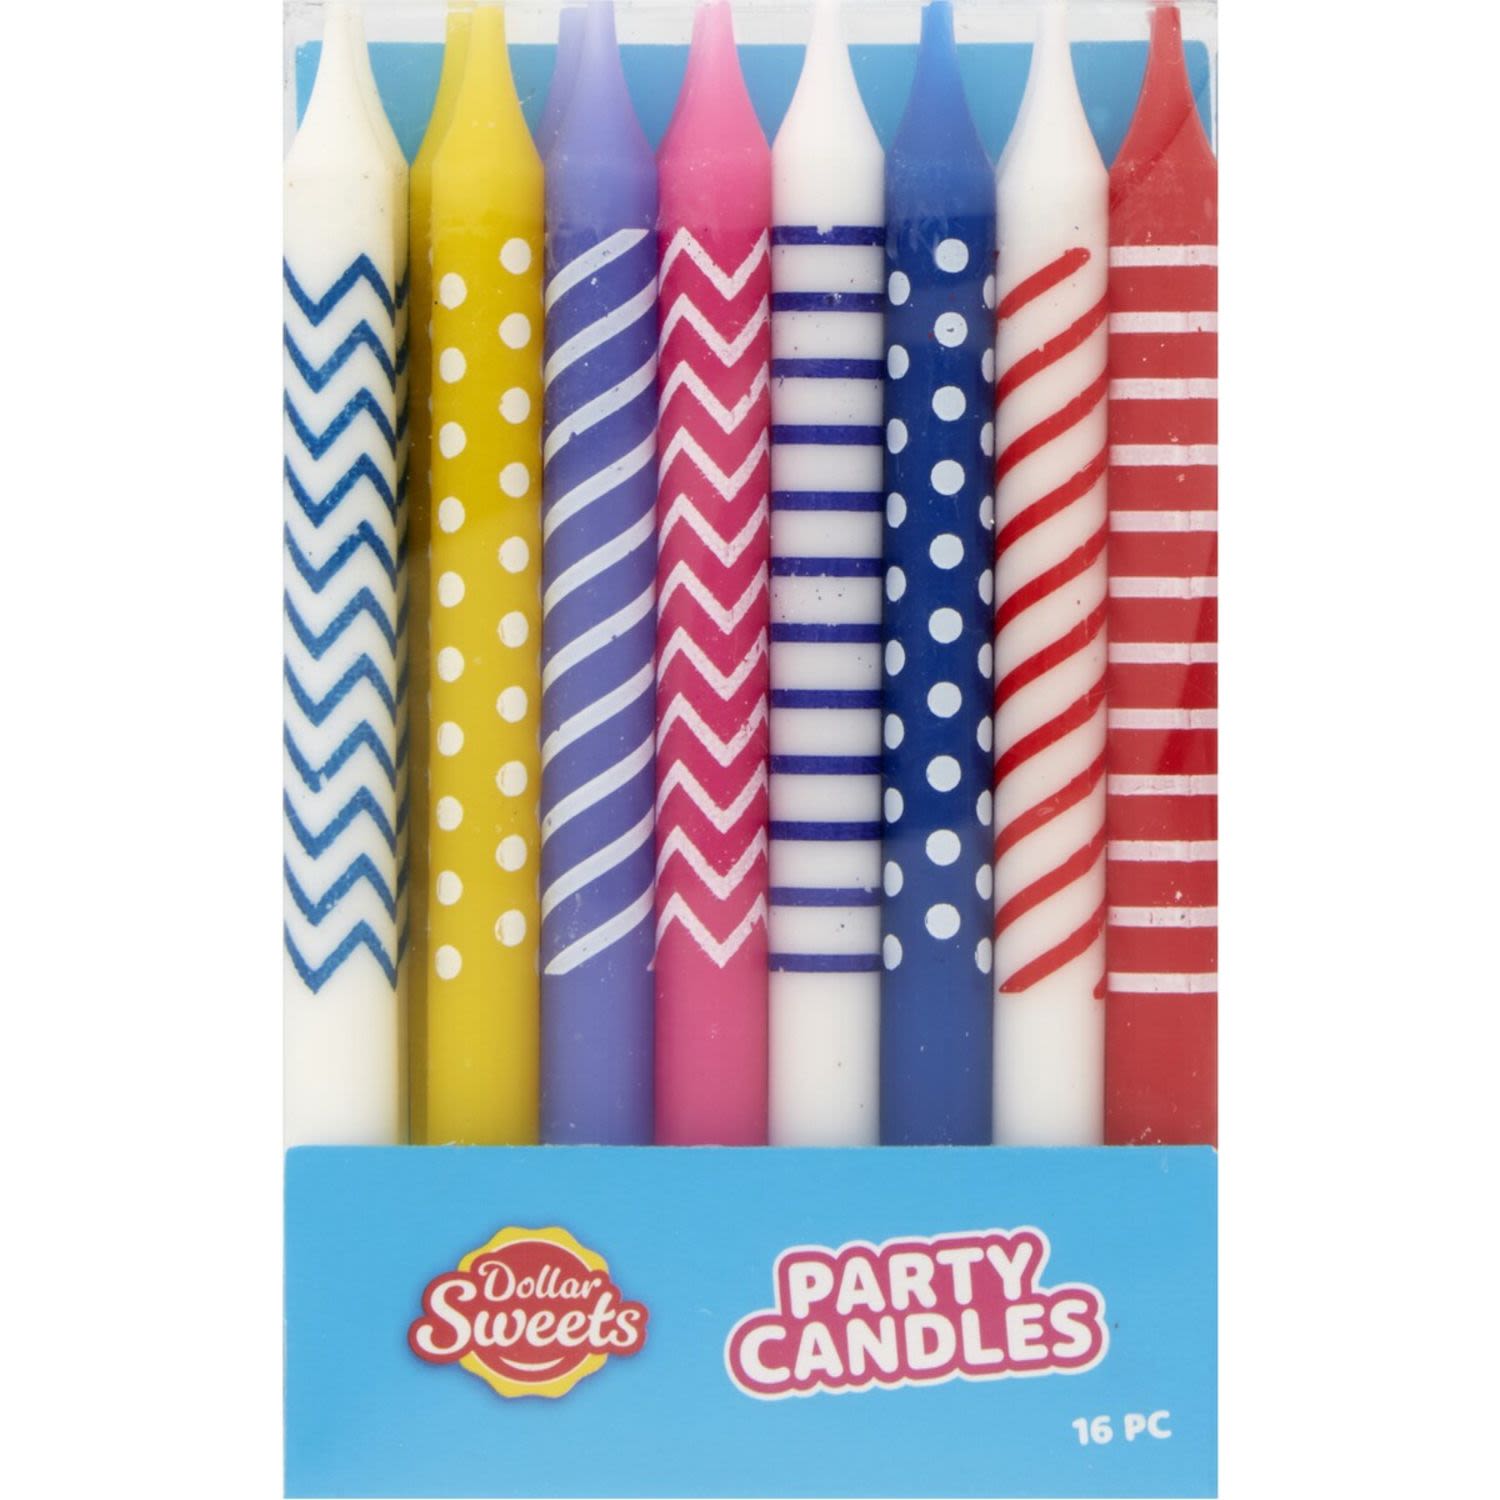 Dollar Sweets Party Candles, 16 Each